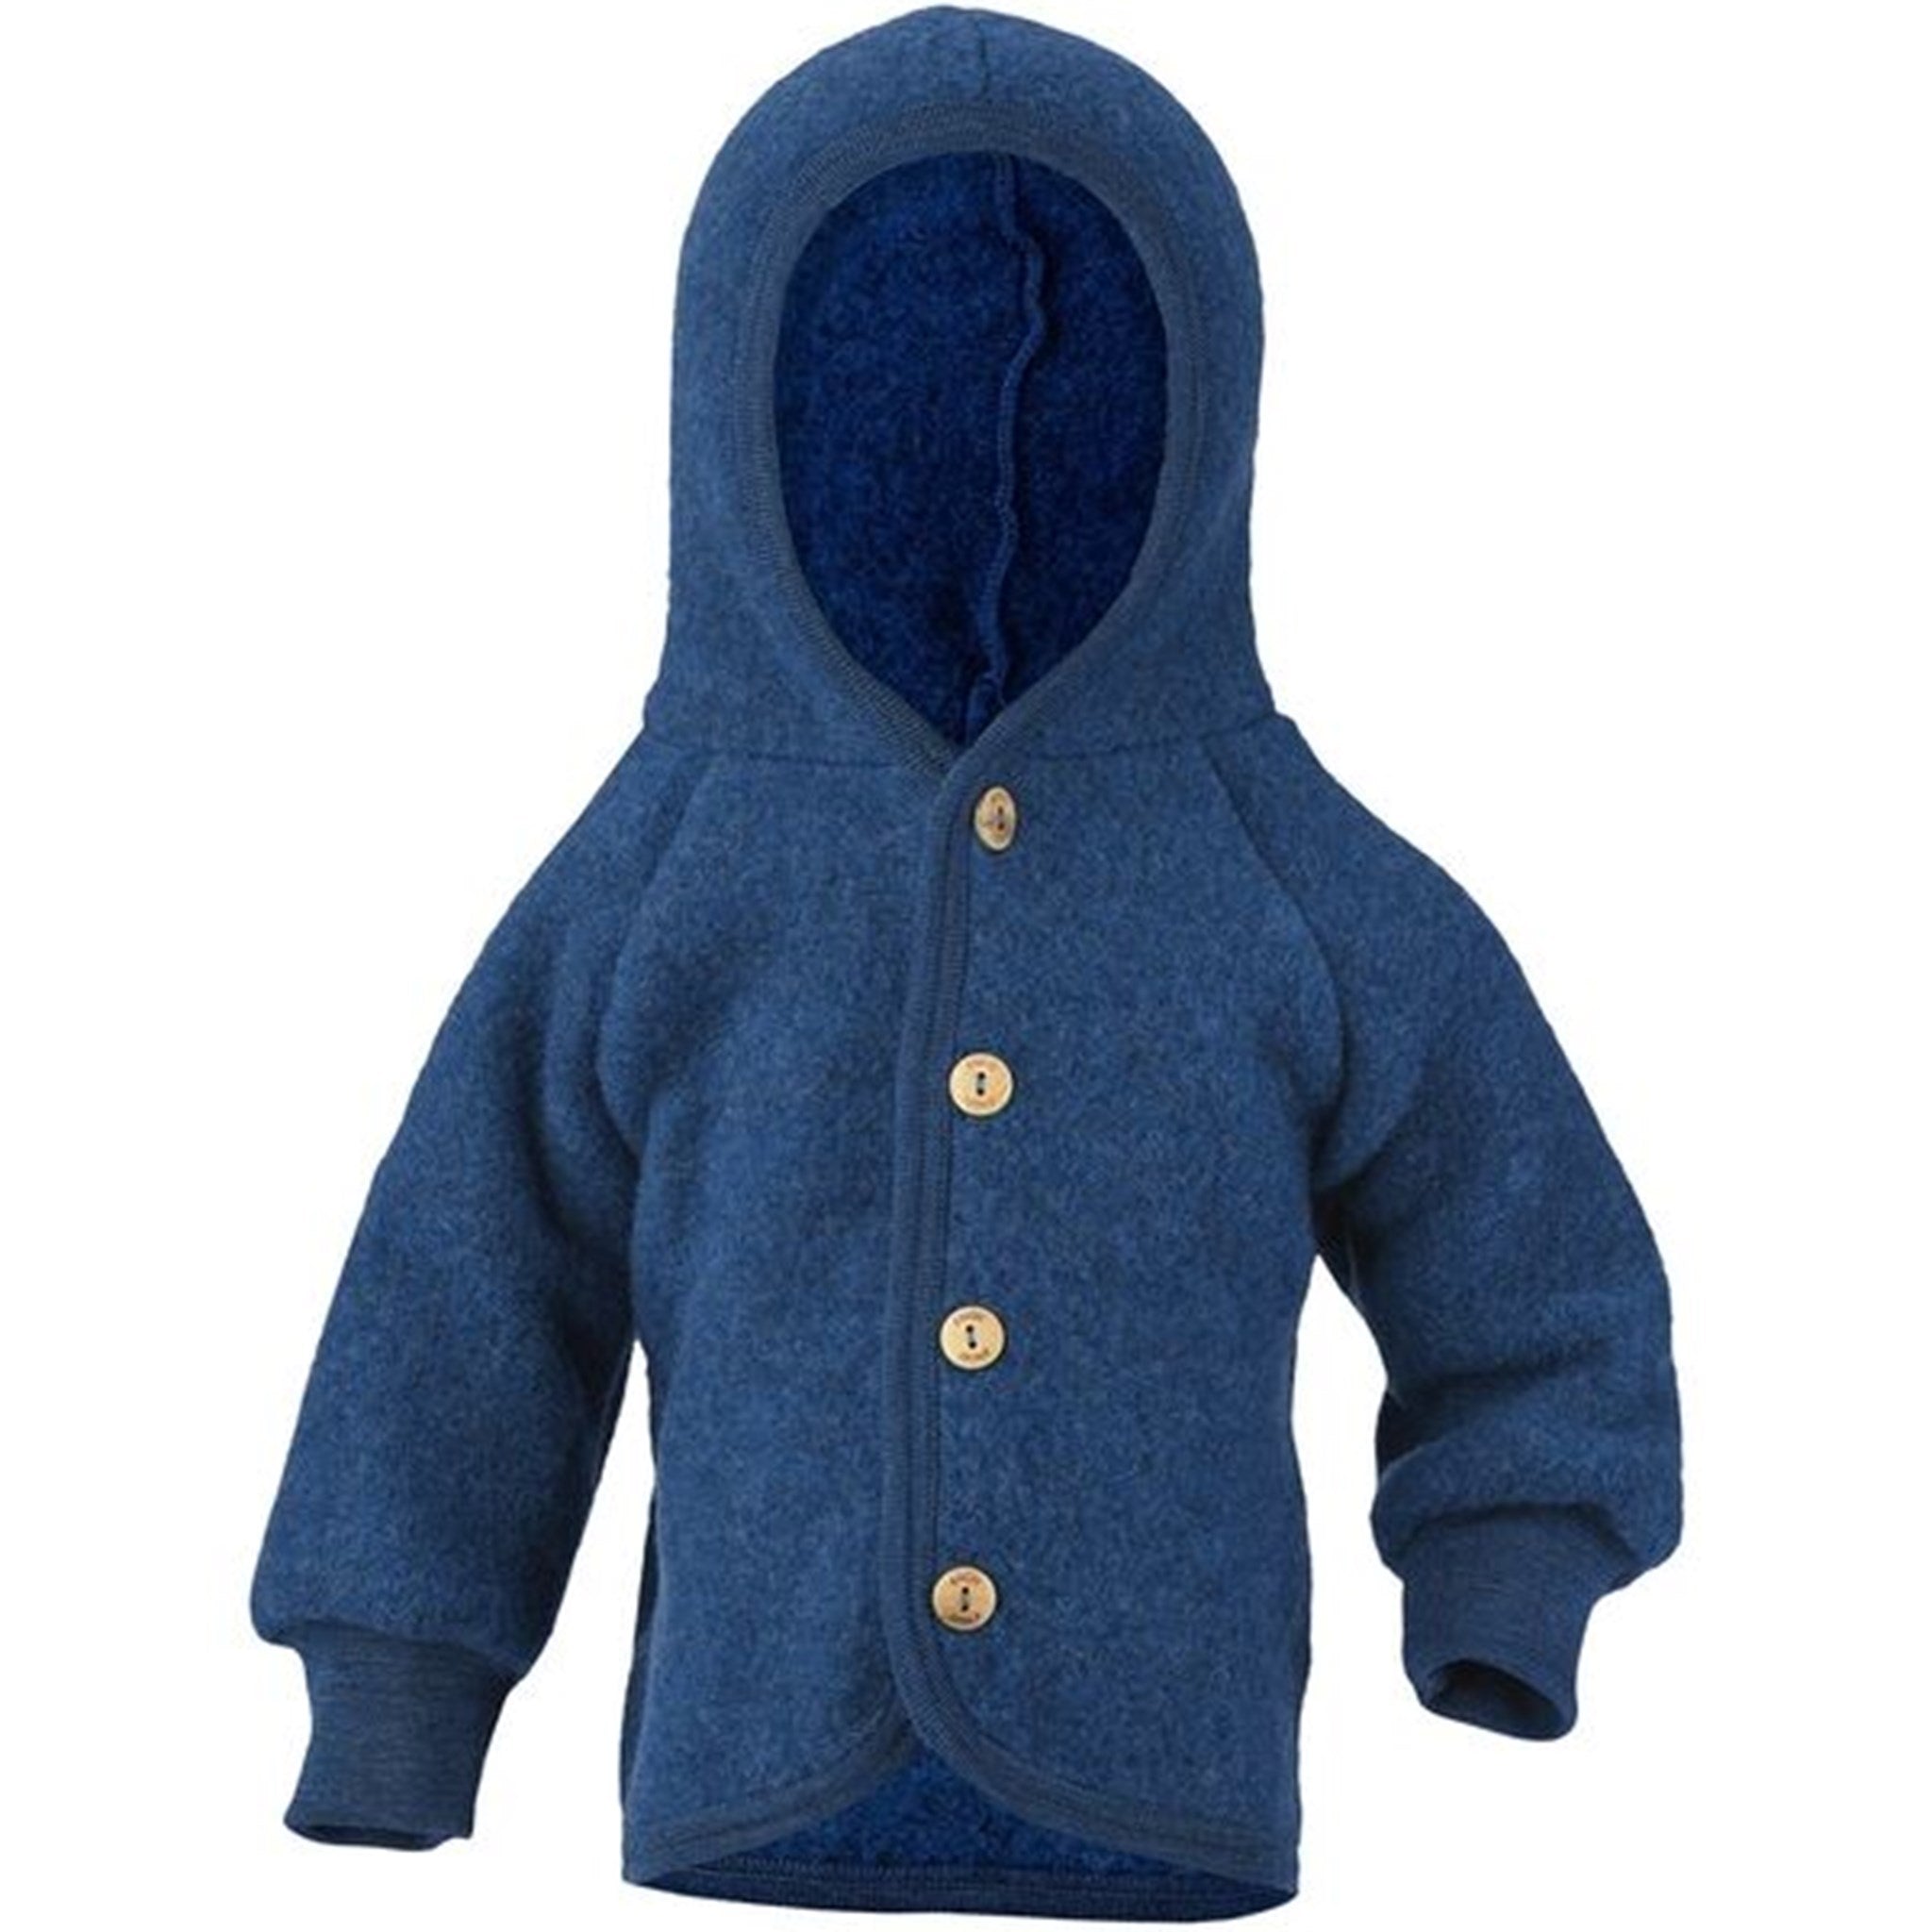 Engel Hooded Jacket with Wooden Buttons Blue Mélange